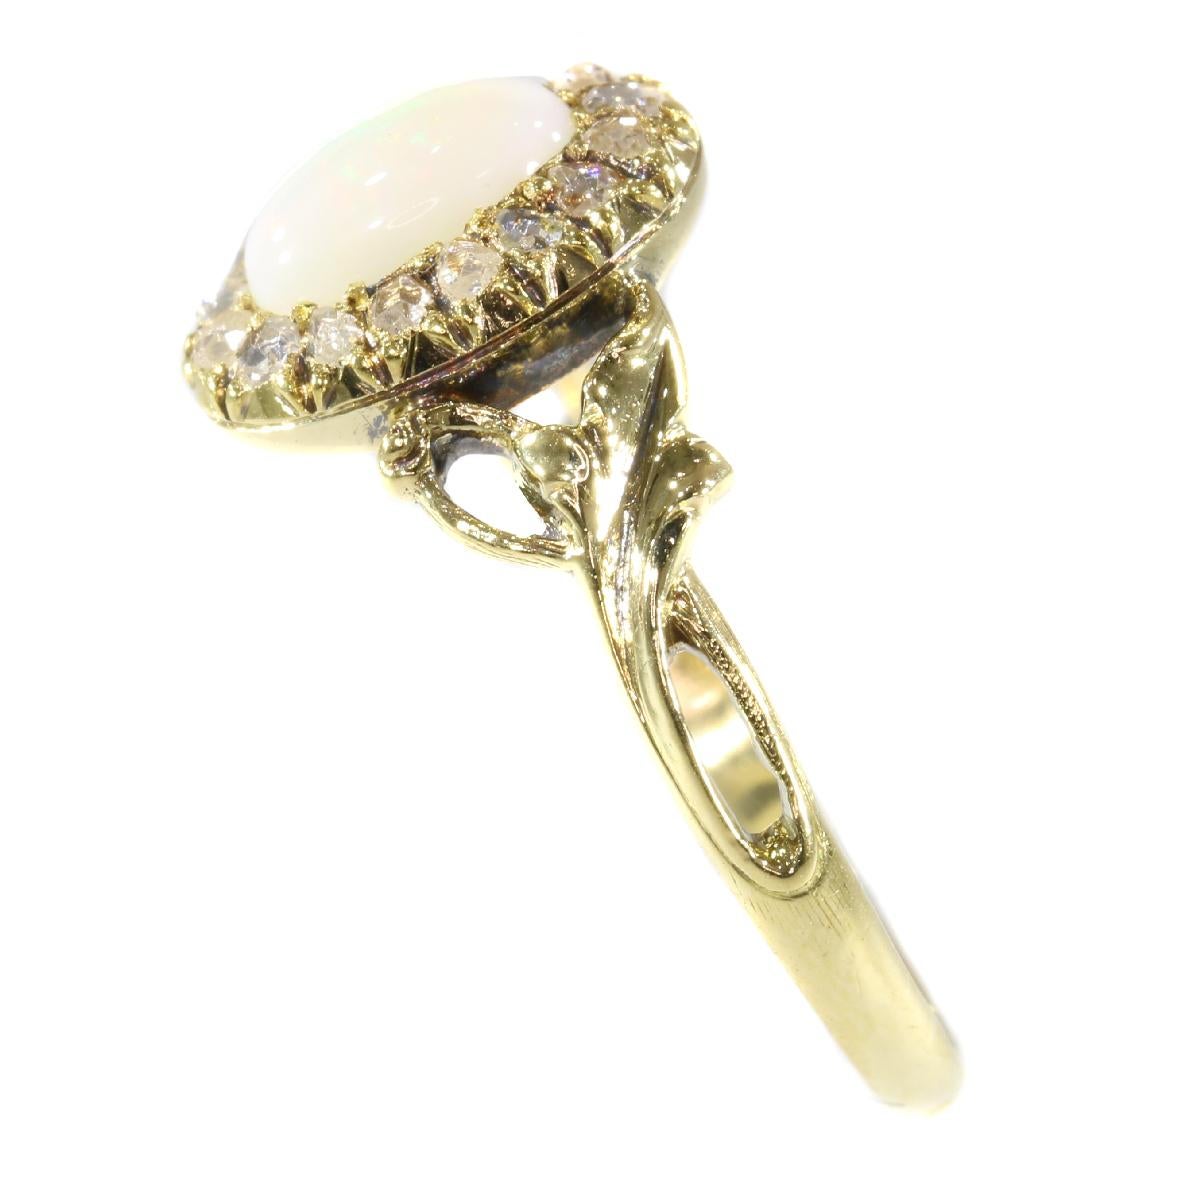 French Antique Art Nouveau Gold Ring with Diamonds and Opal 1